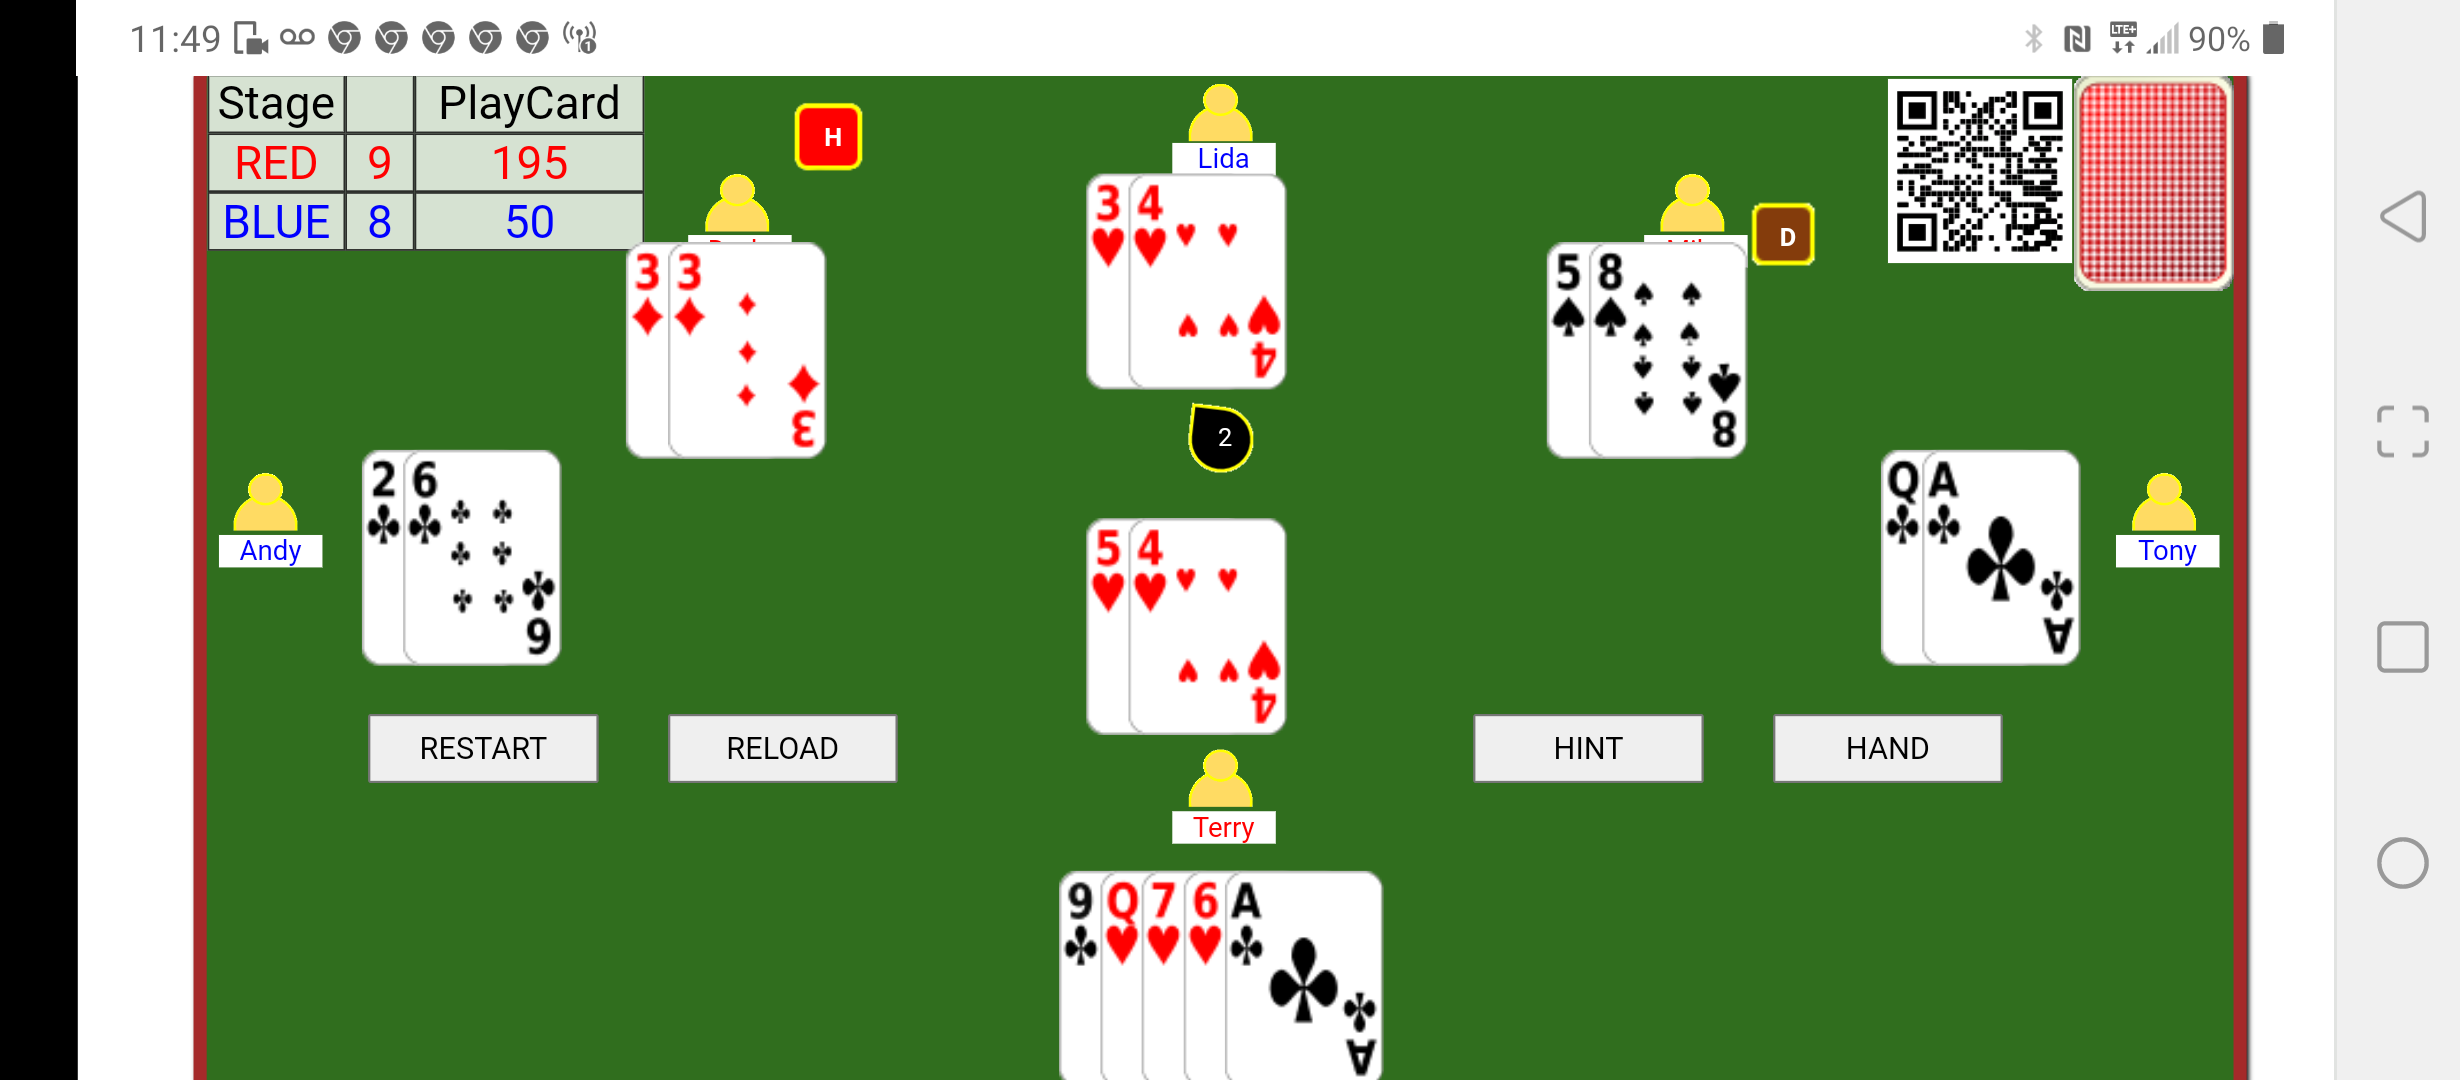 html5 tractor card game Screenshot_20220120-114924.png